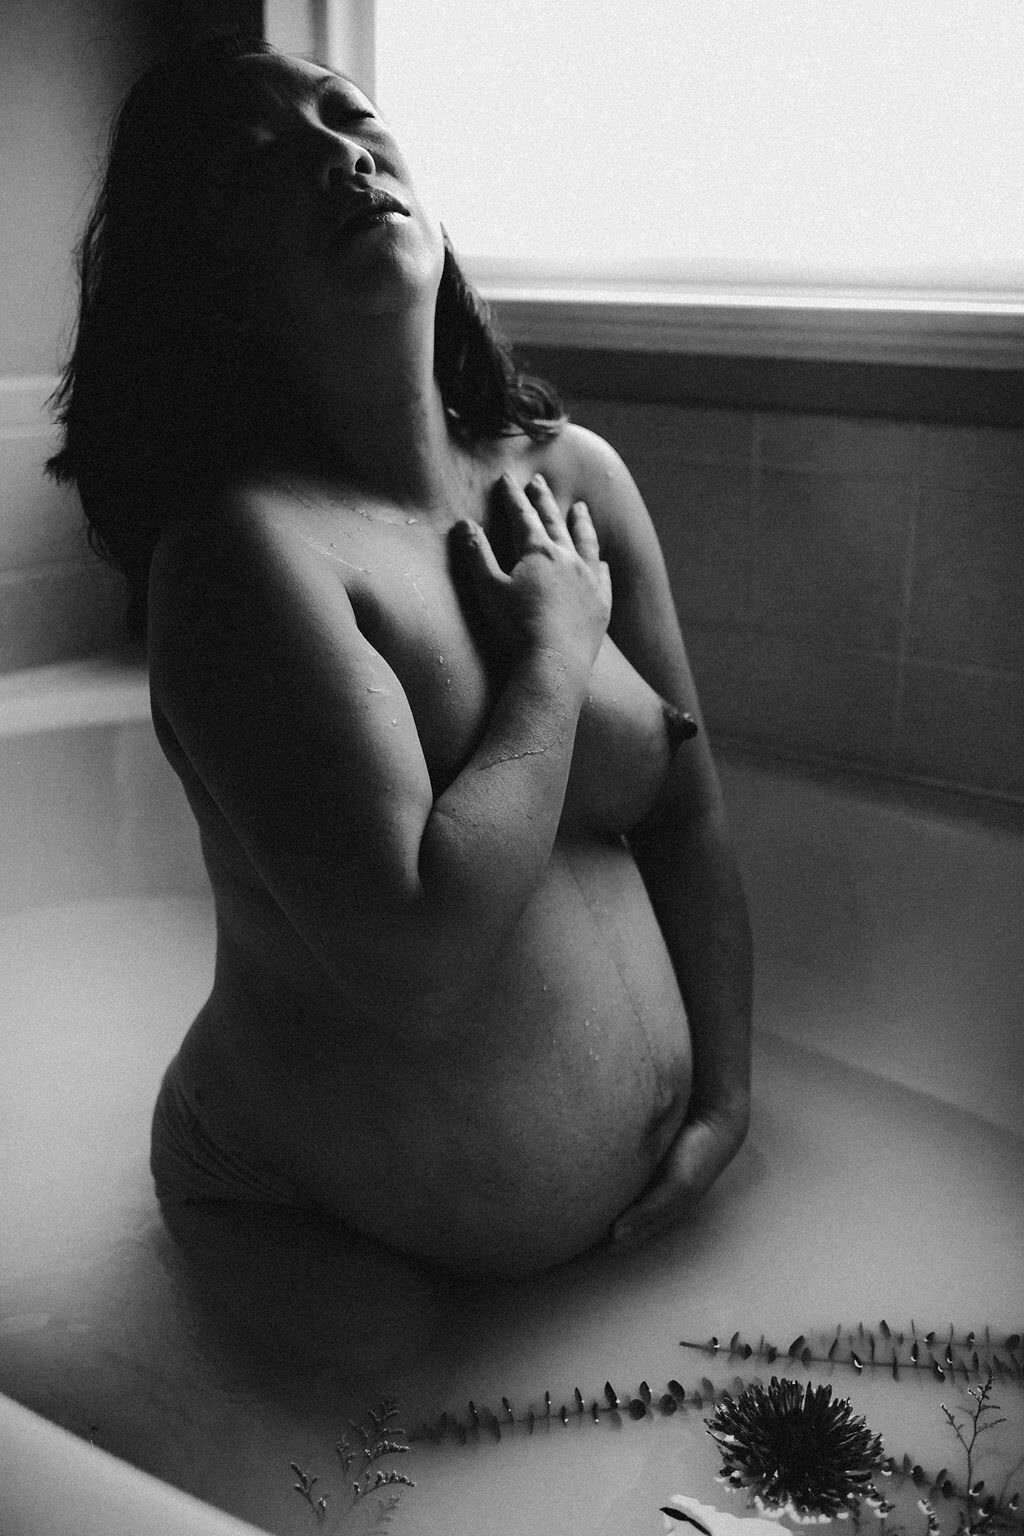 black and white image pregnant woman sitting in bath tub